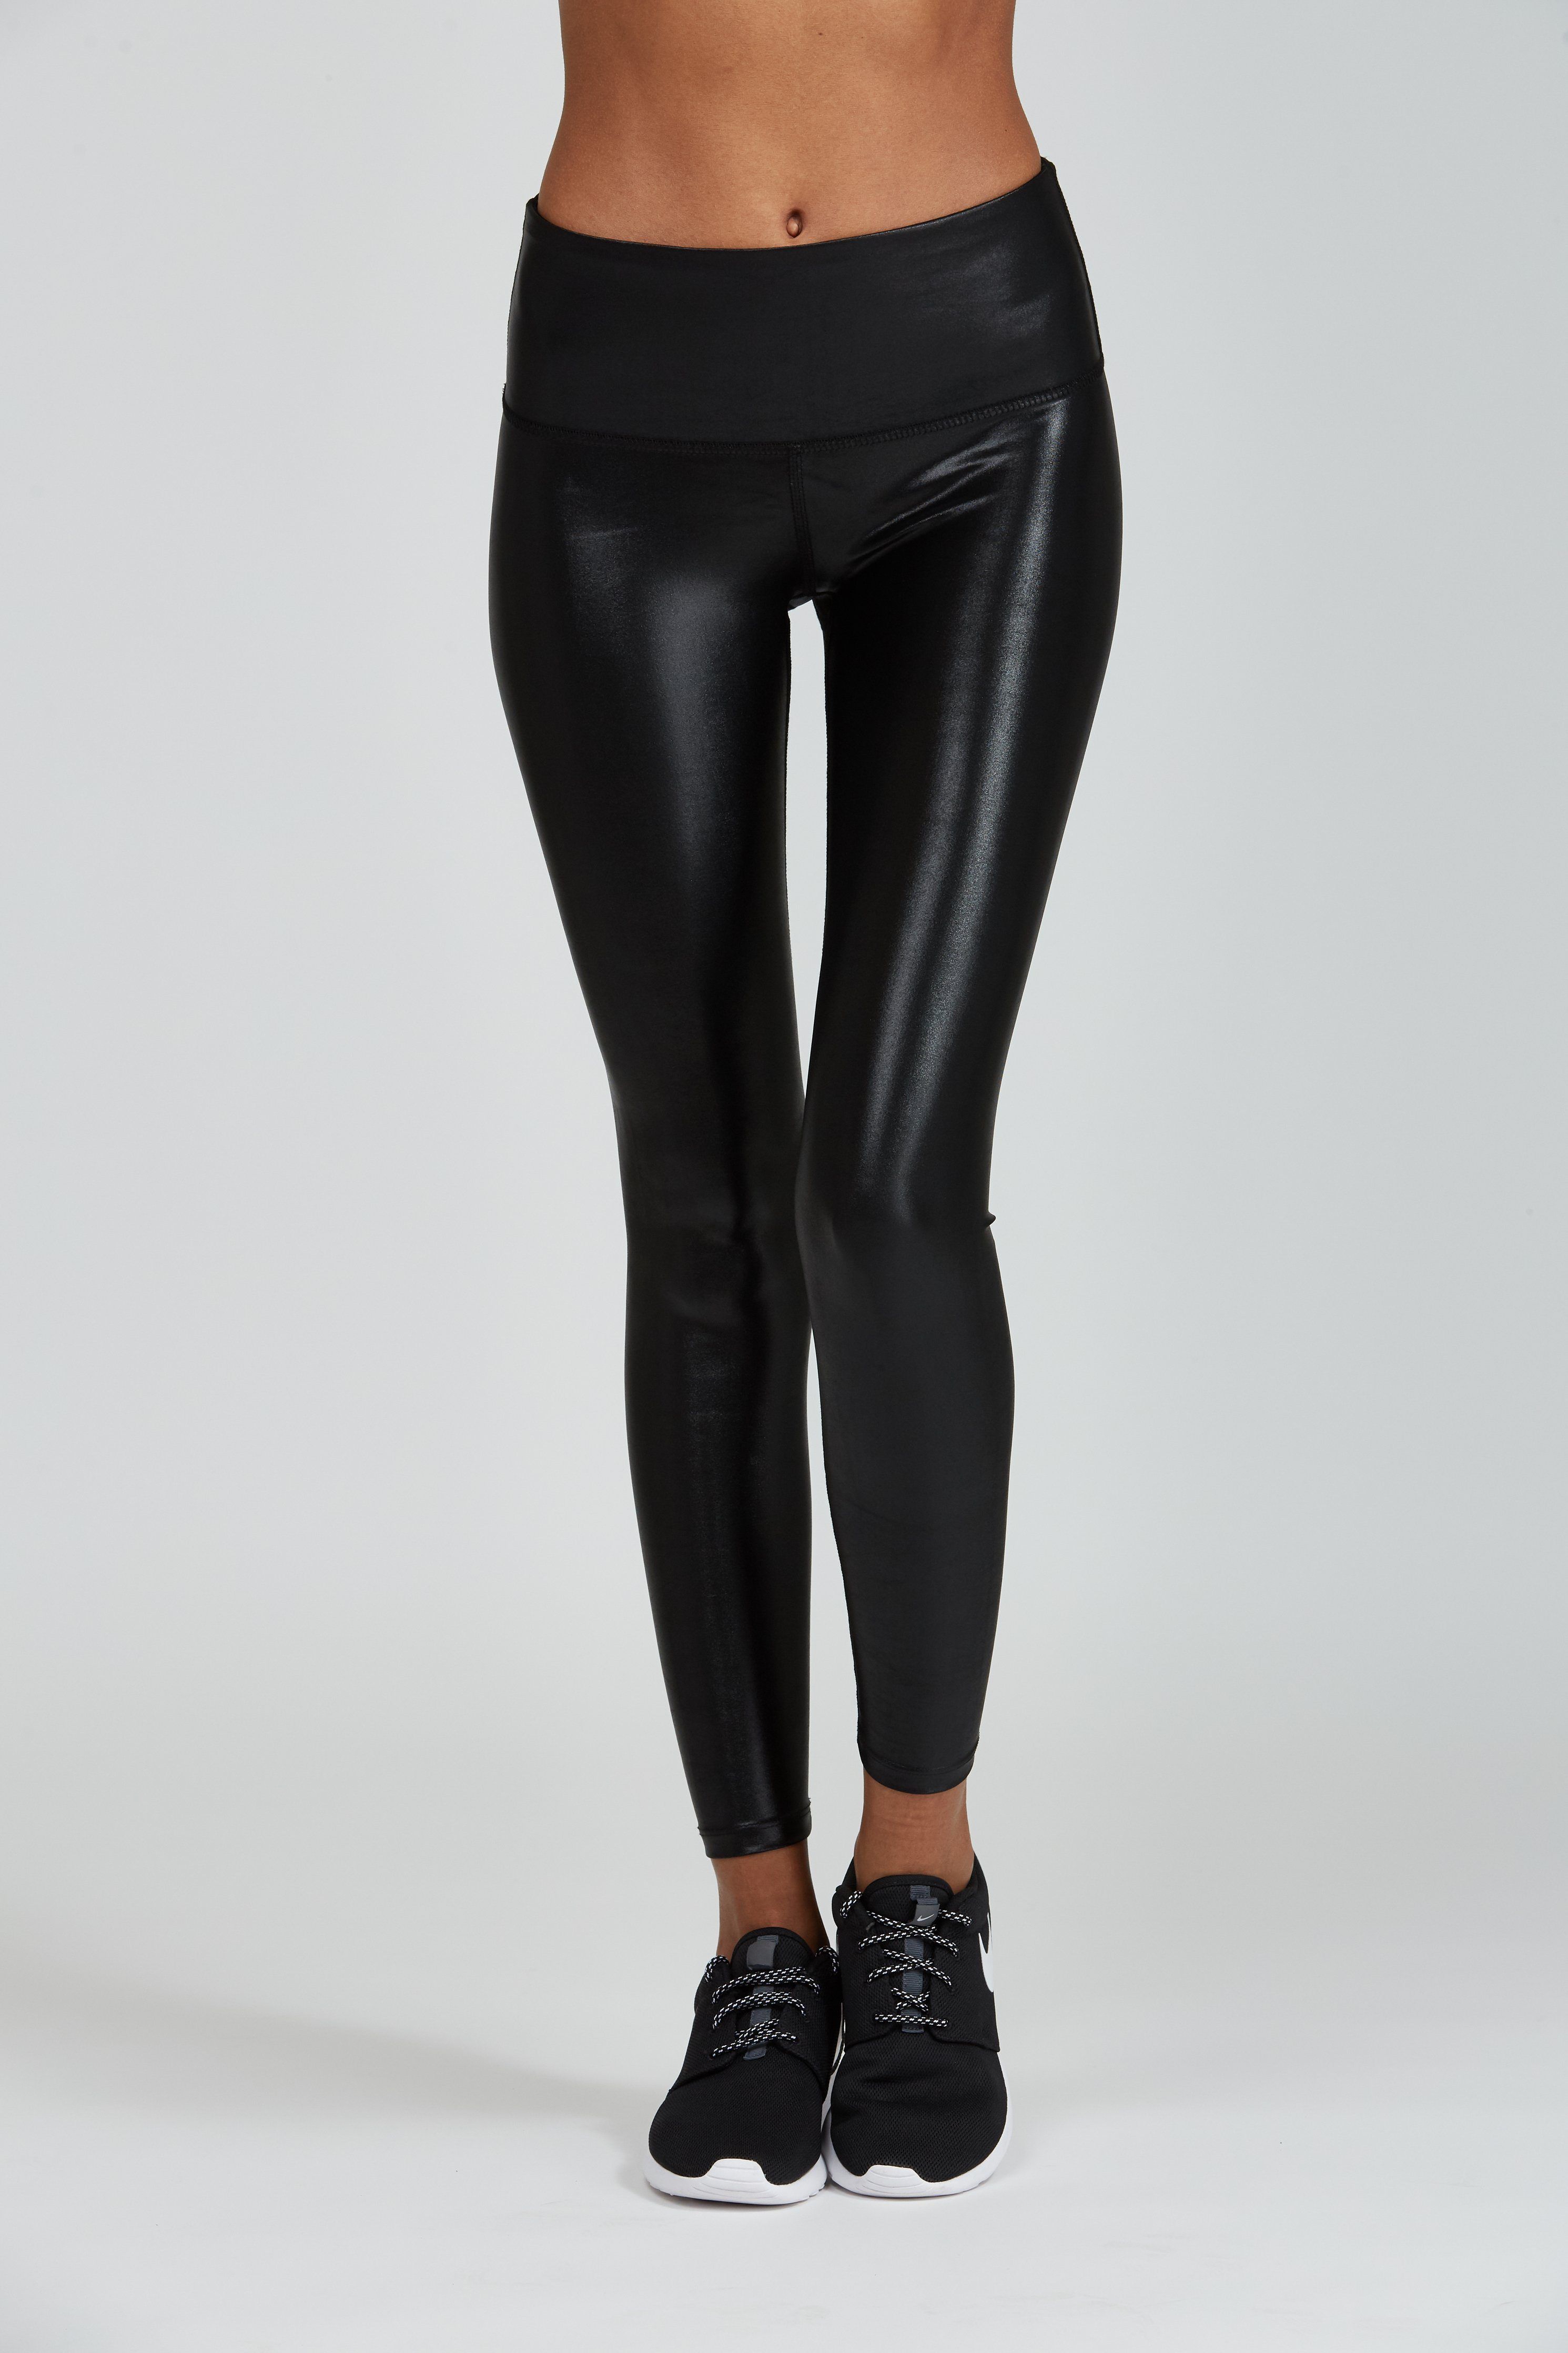 leather workout leggings